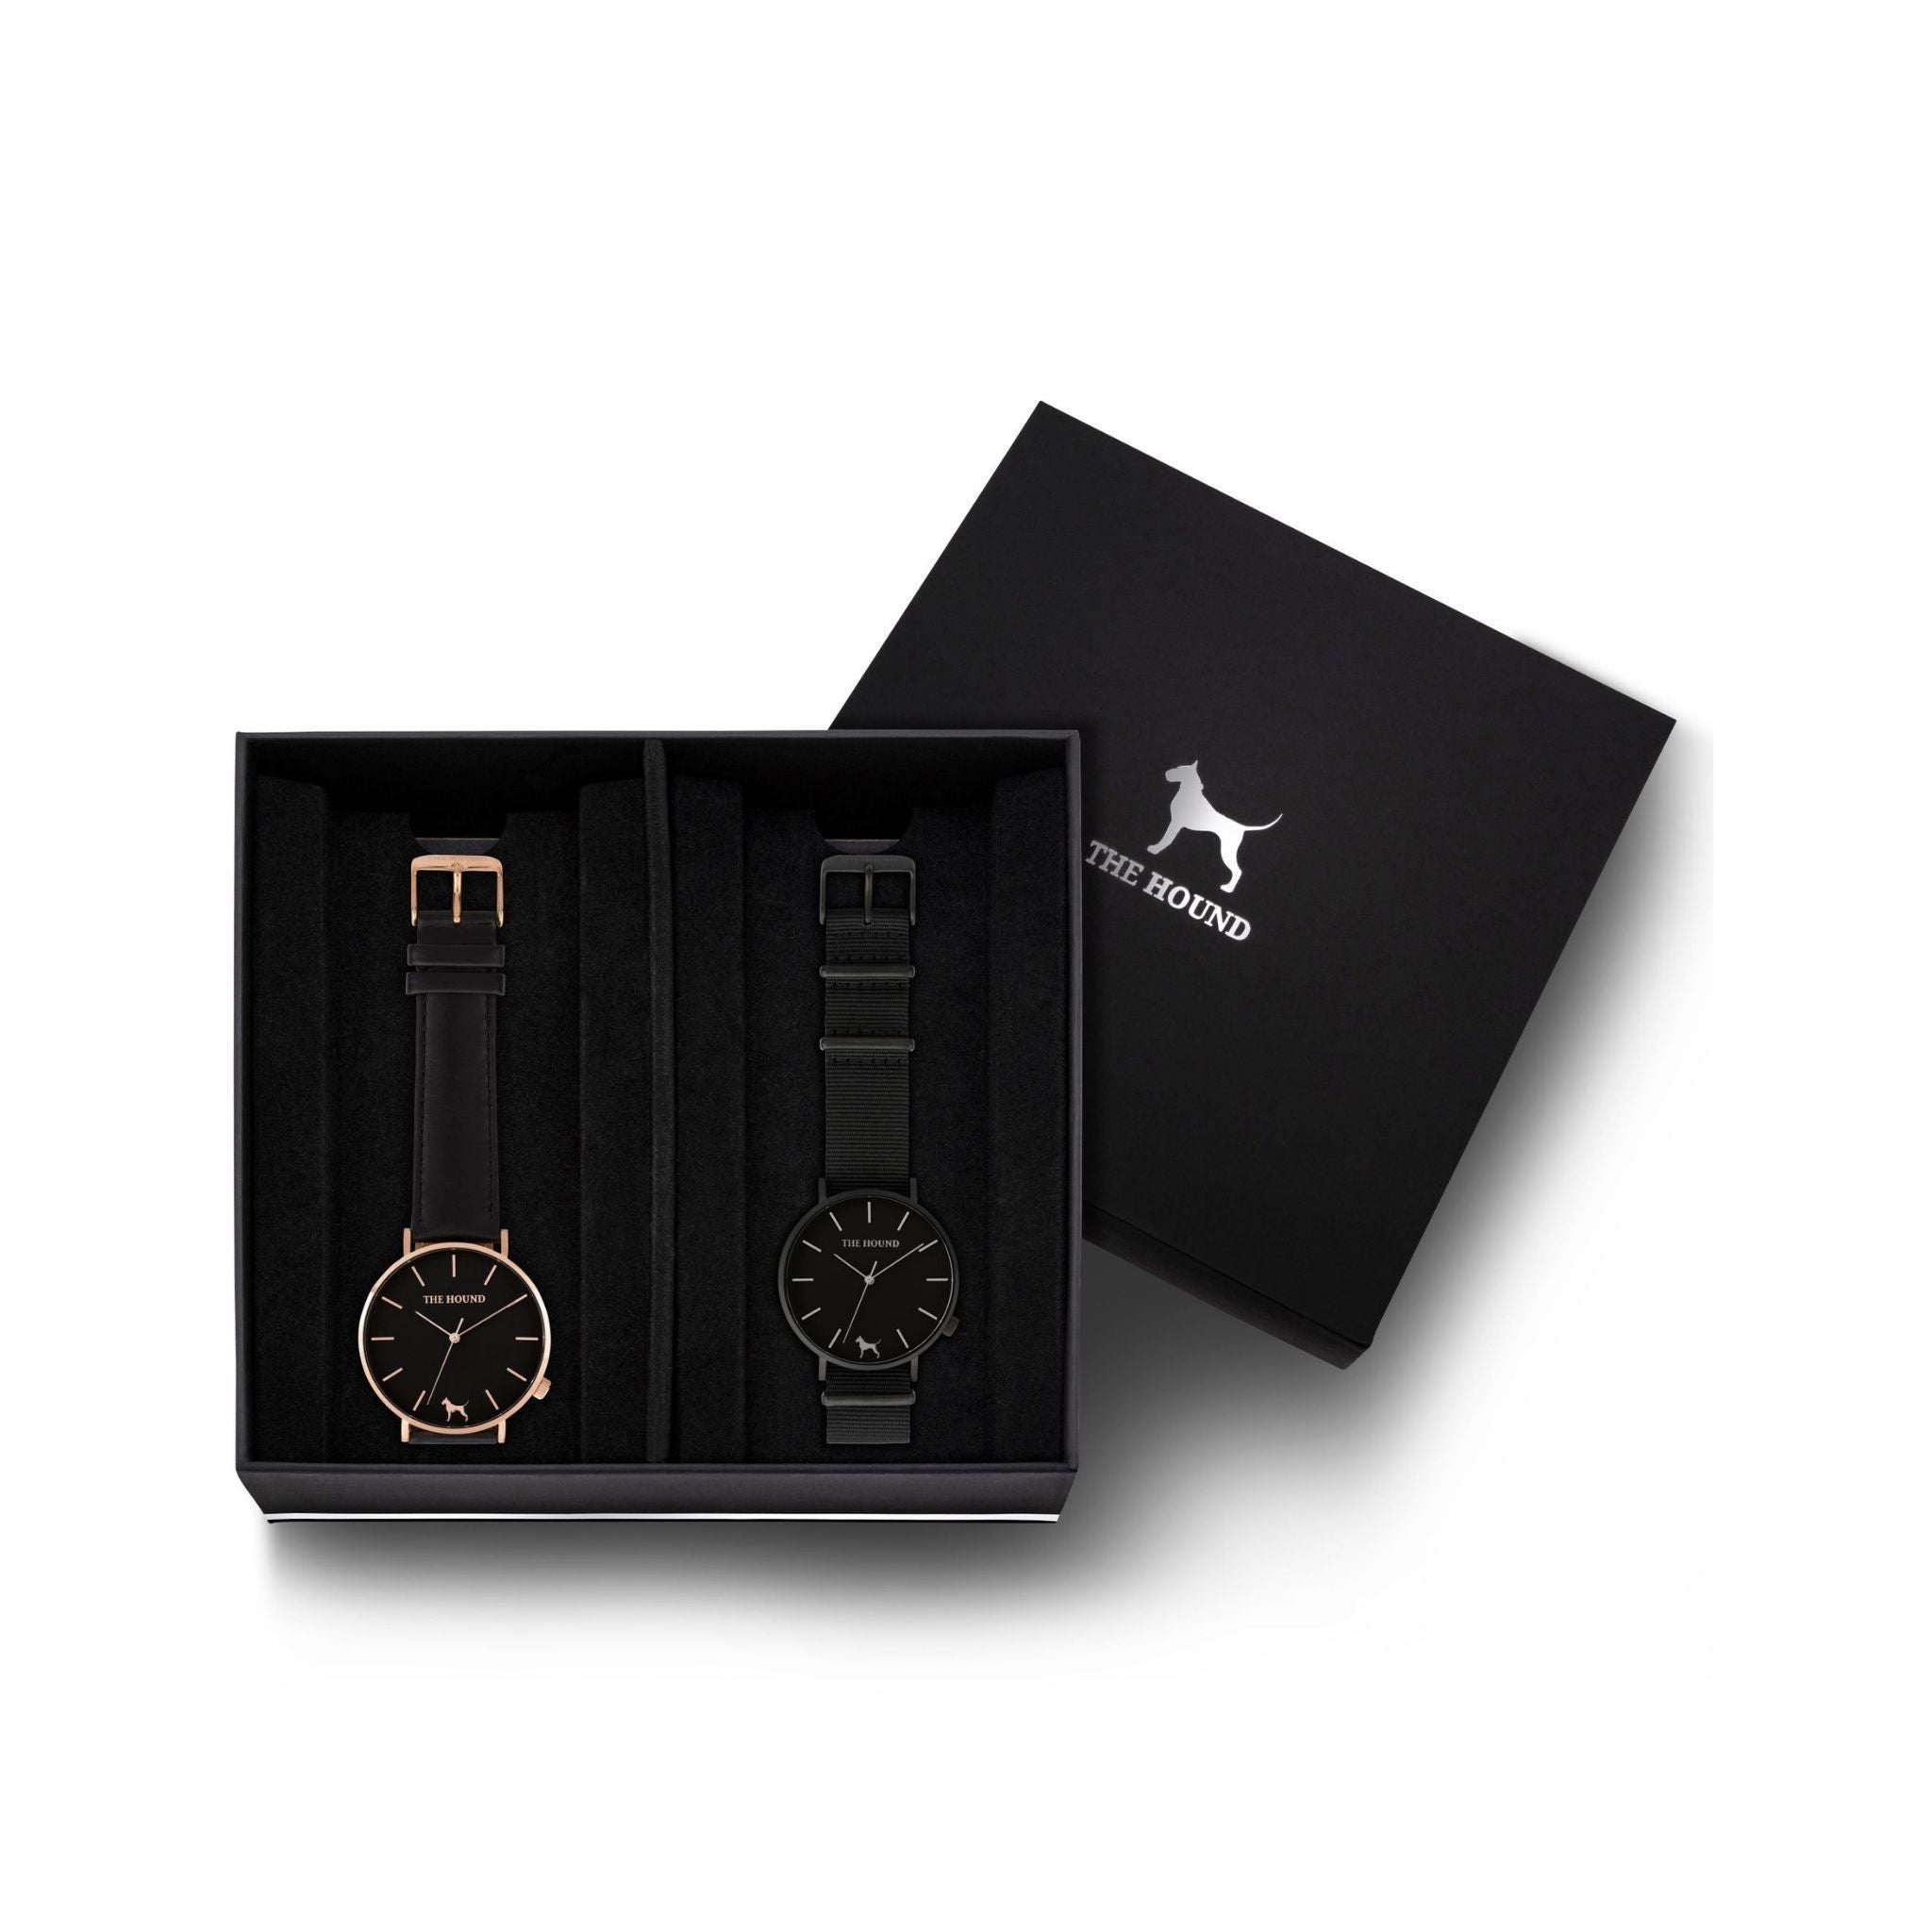 Custom gift set - Rose gold and black watch with stitched black genuine leather band and a matte black and black watch with black nato leather band